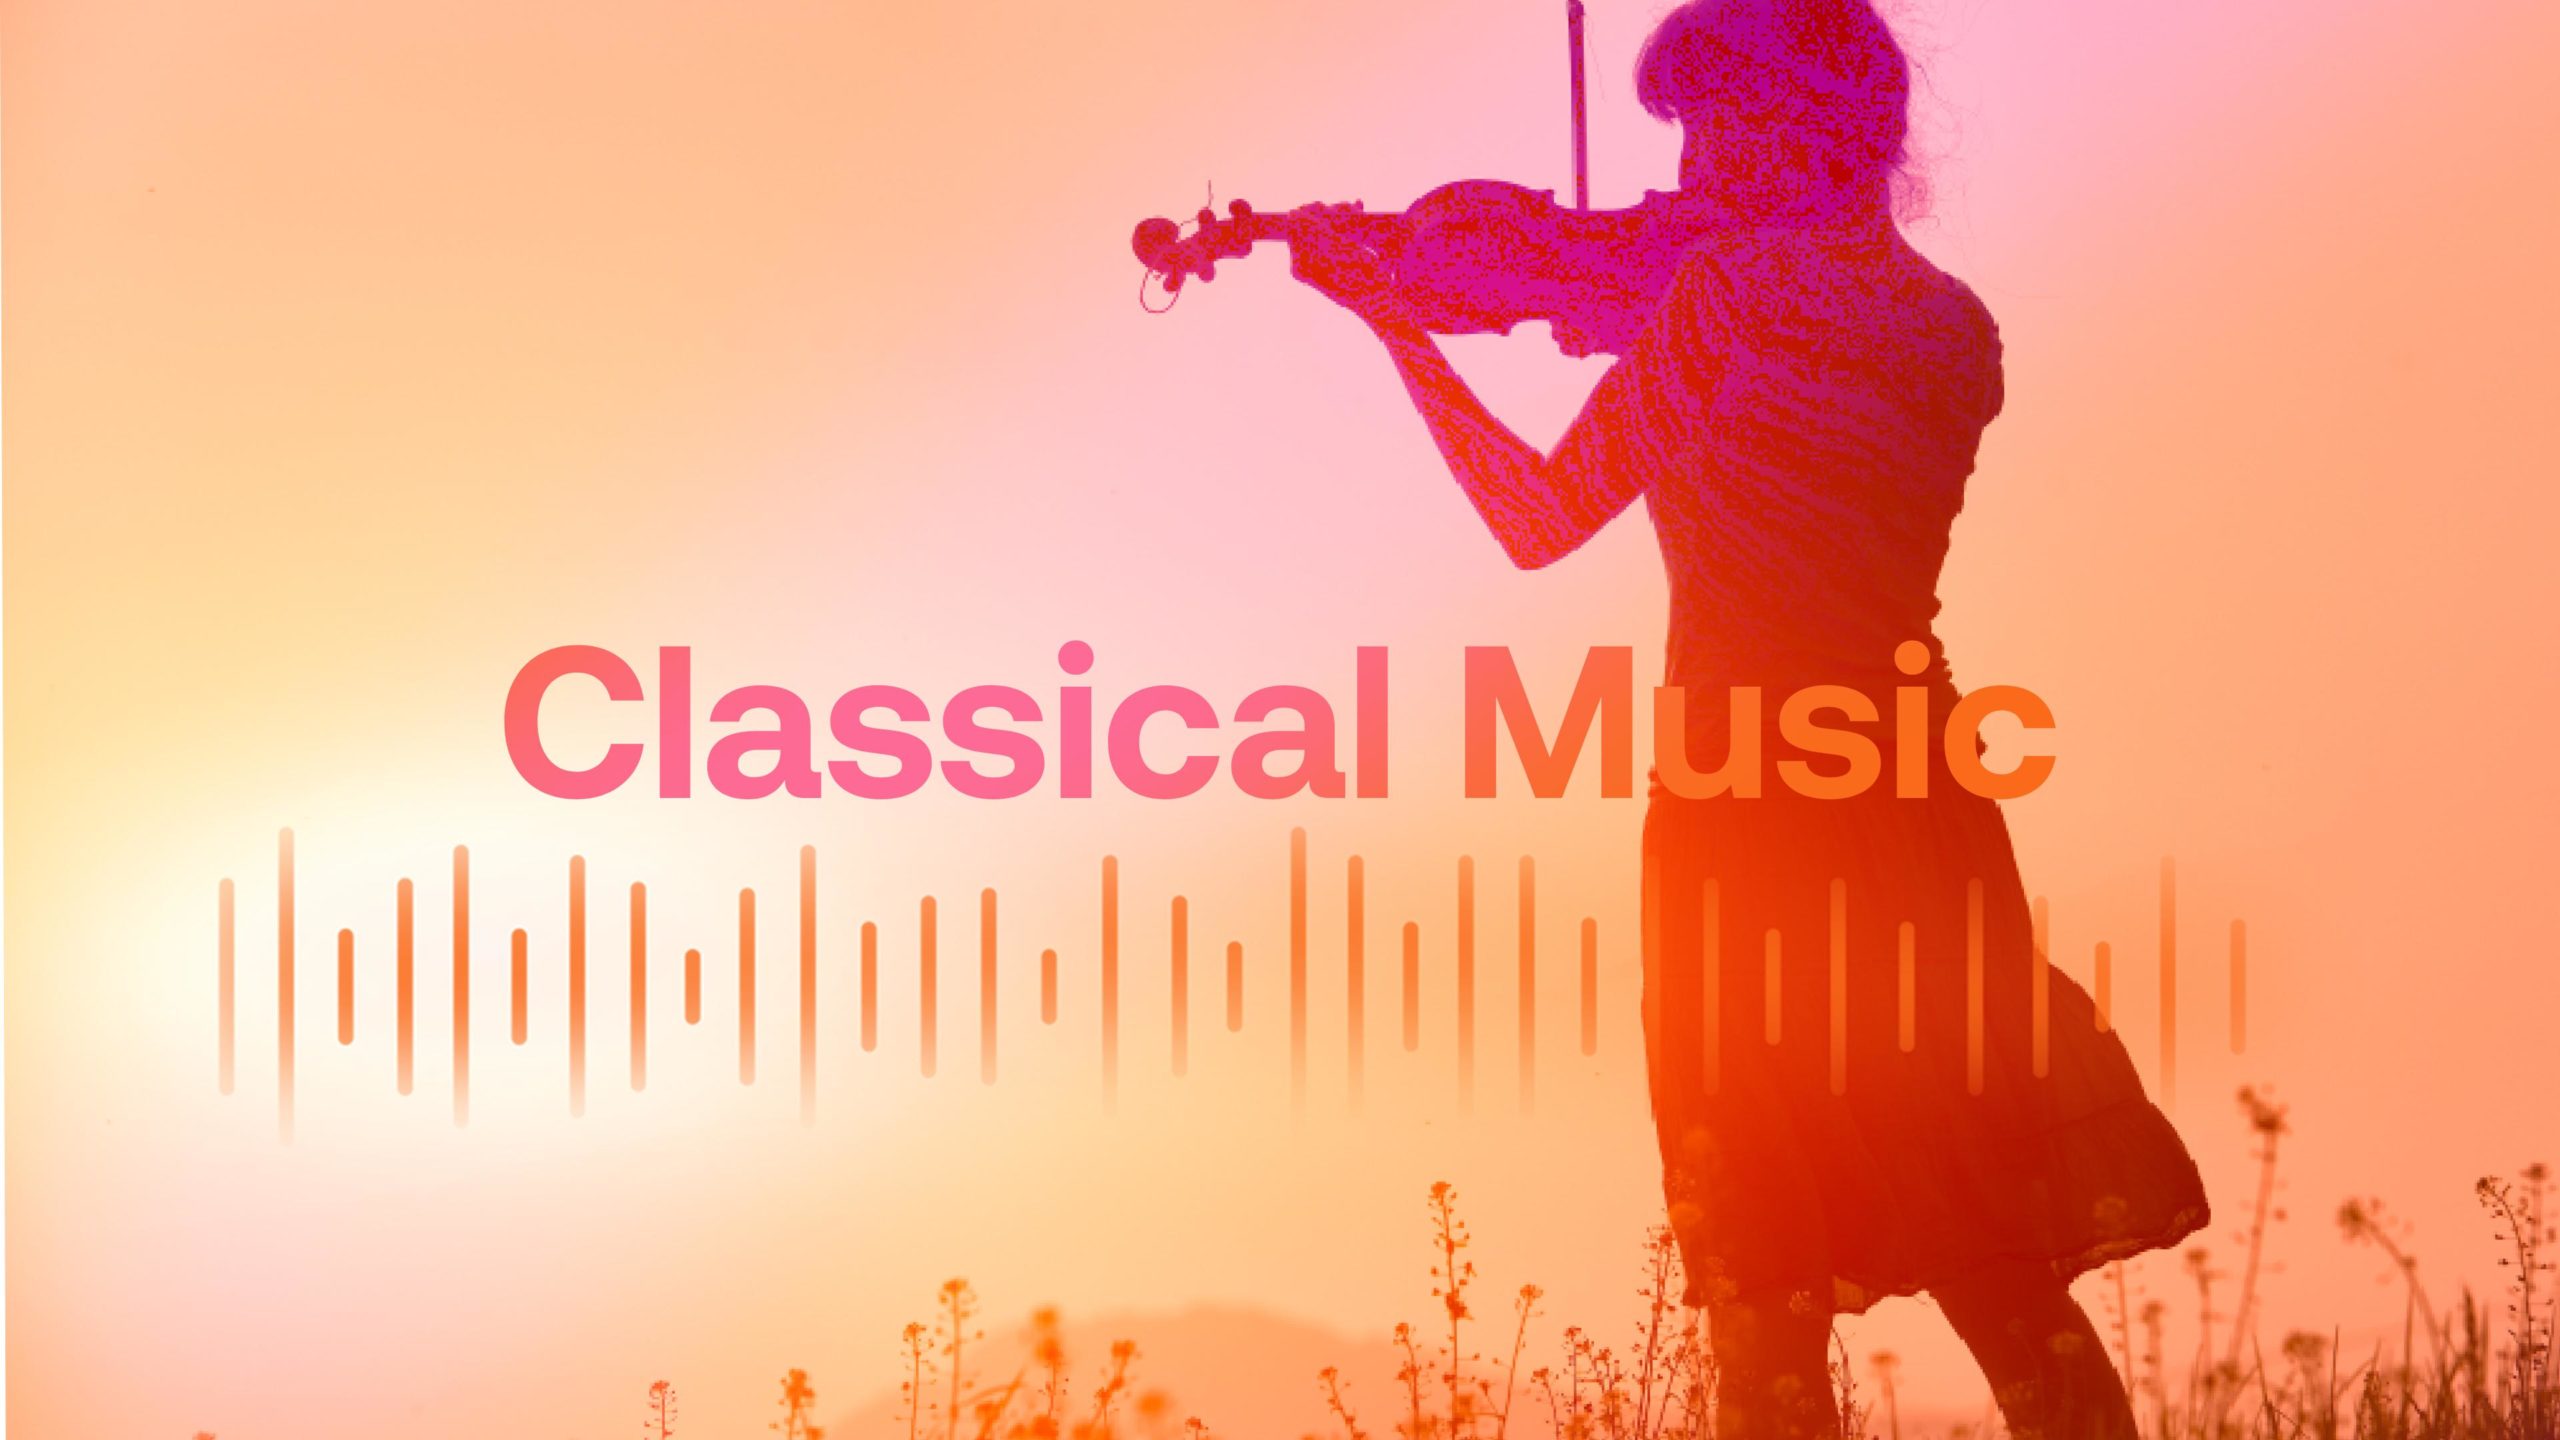 Classical music free download 2fa windows download